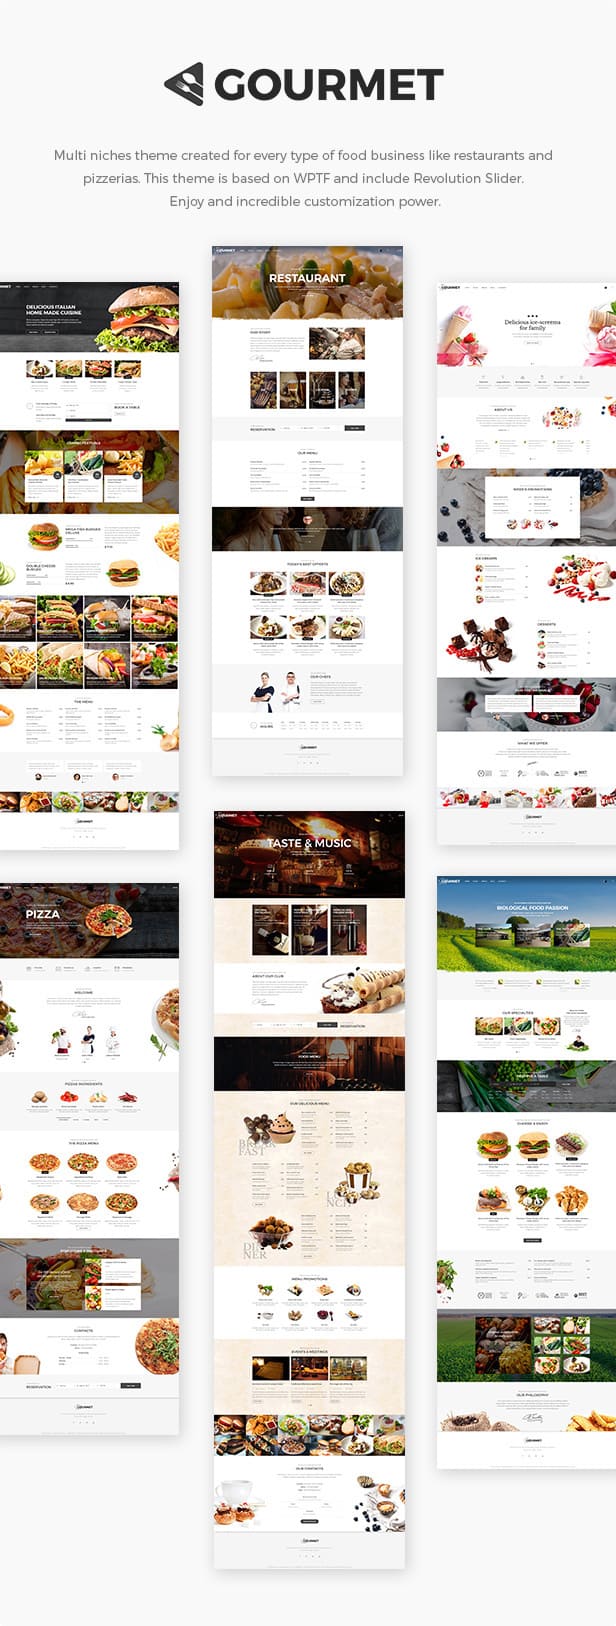 Menu of the Gourmet restaurant and food theme.